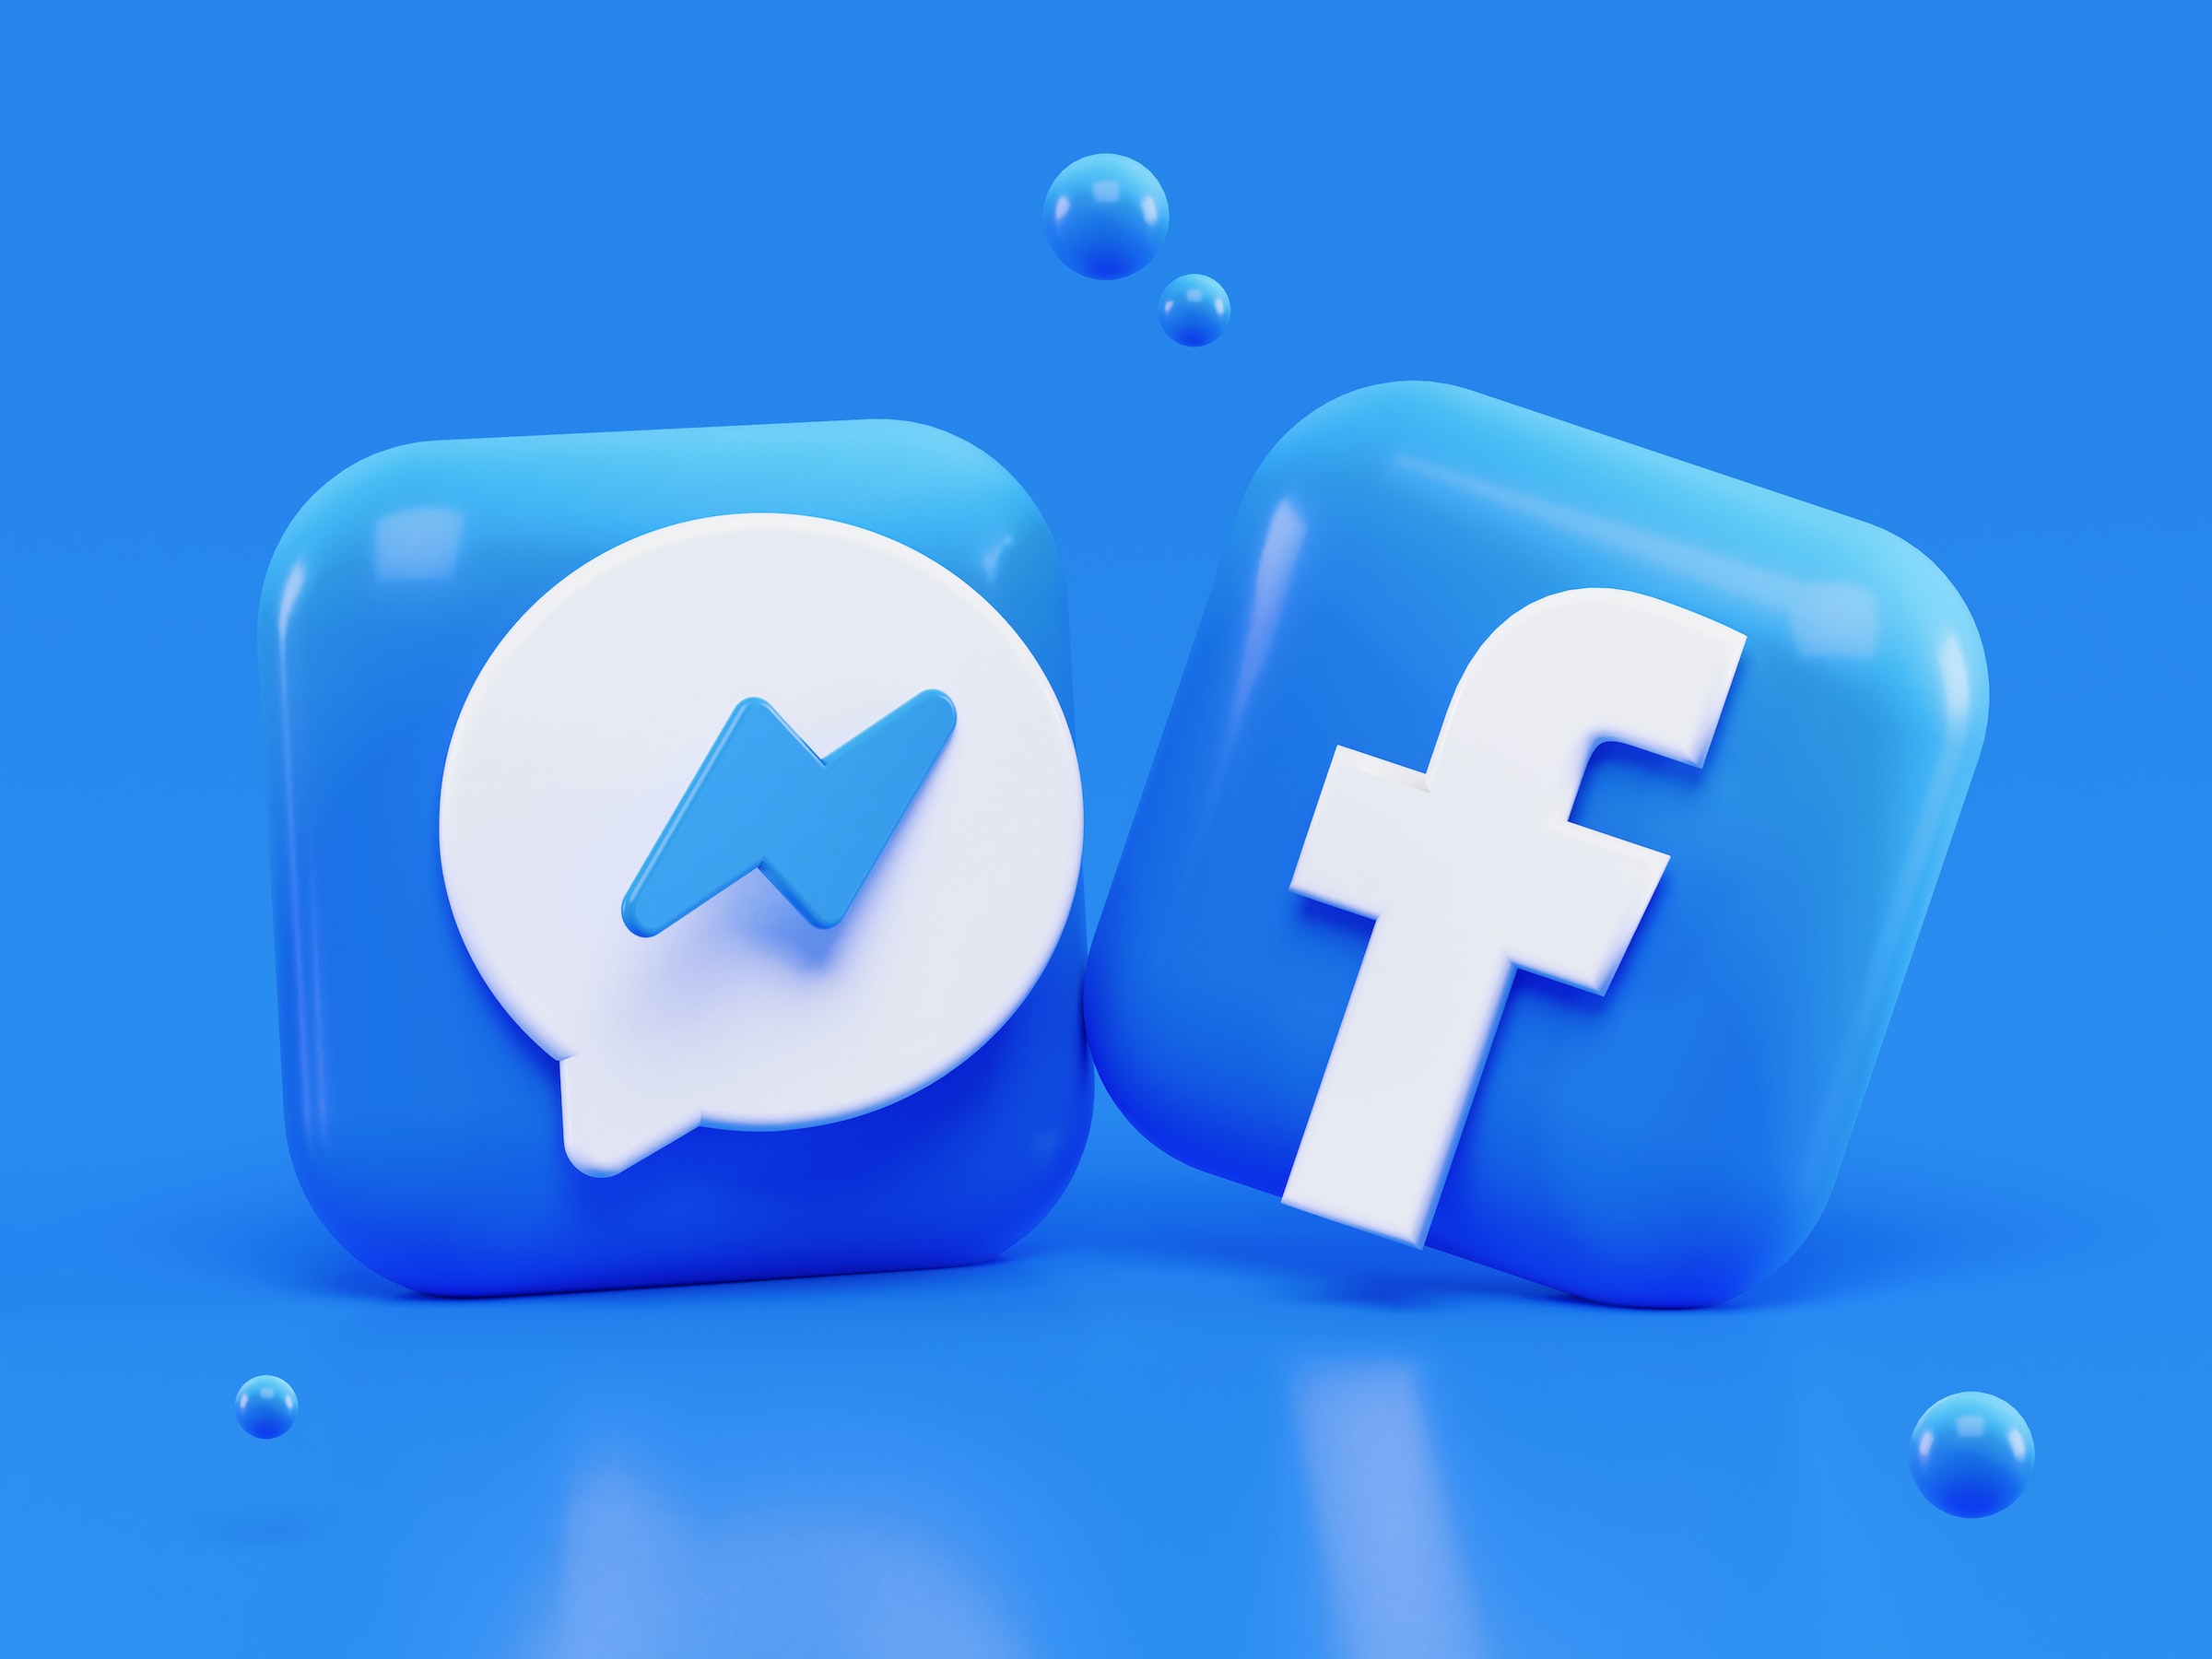 Facebook and messenger app icon in blue